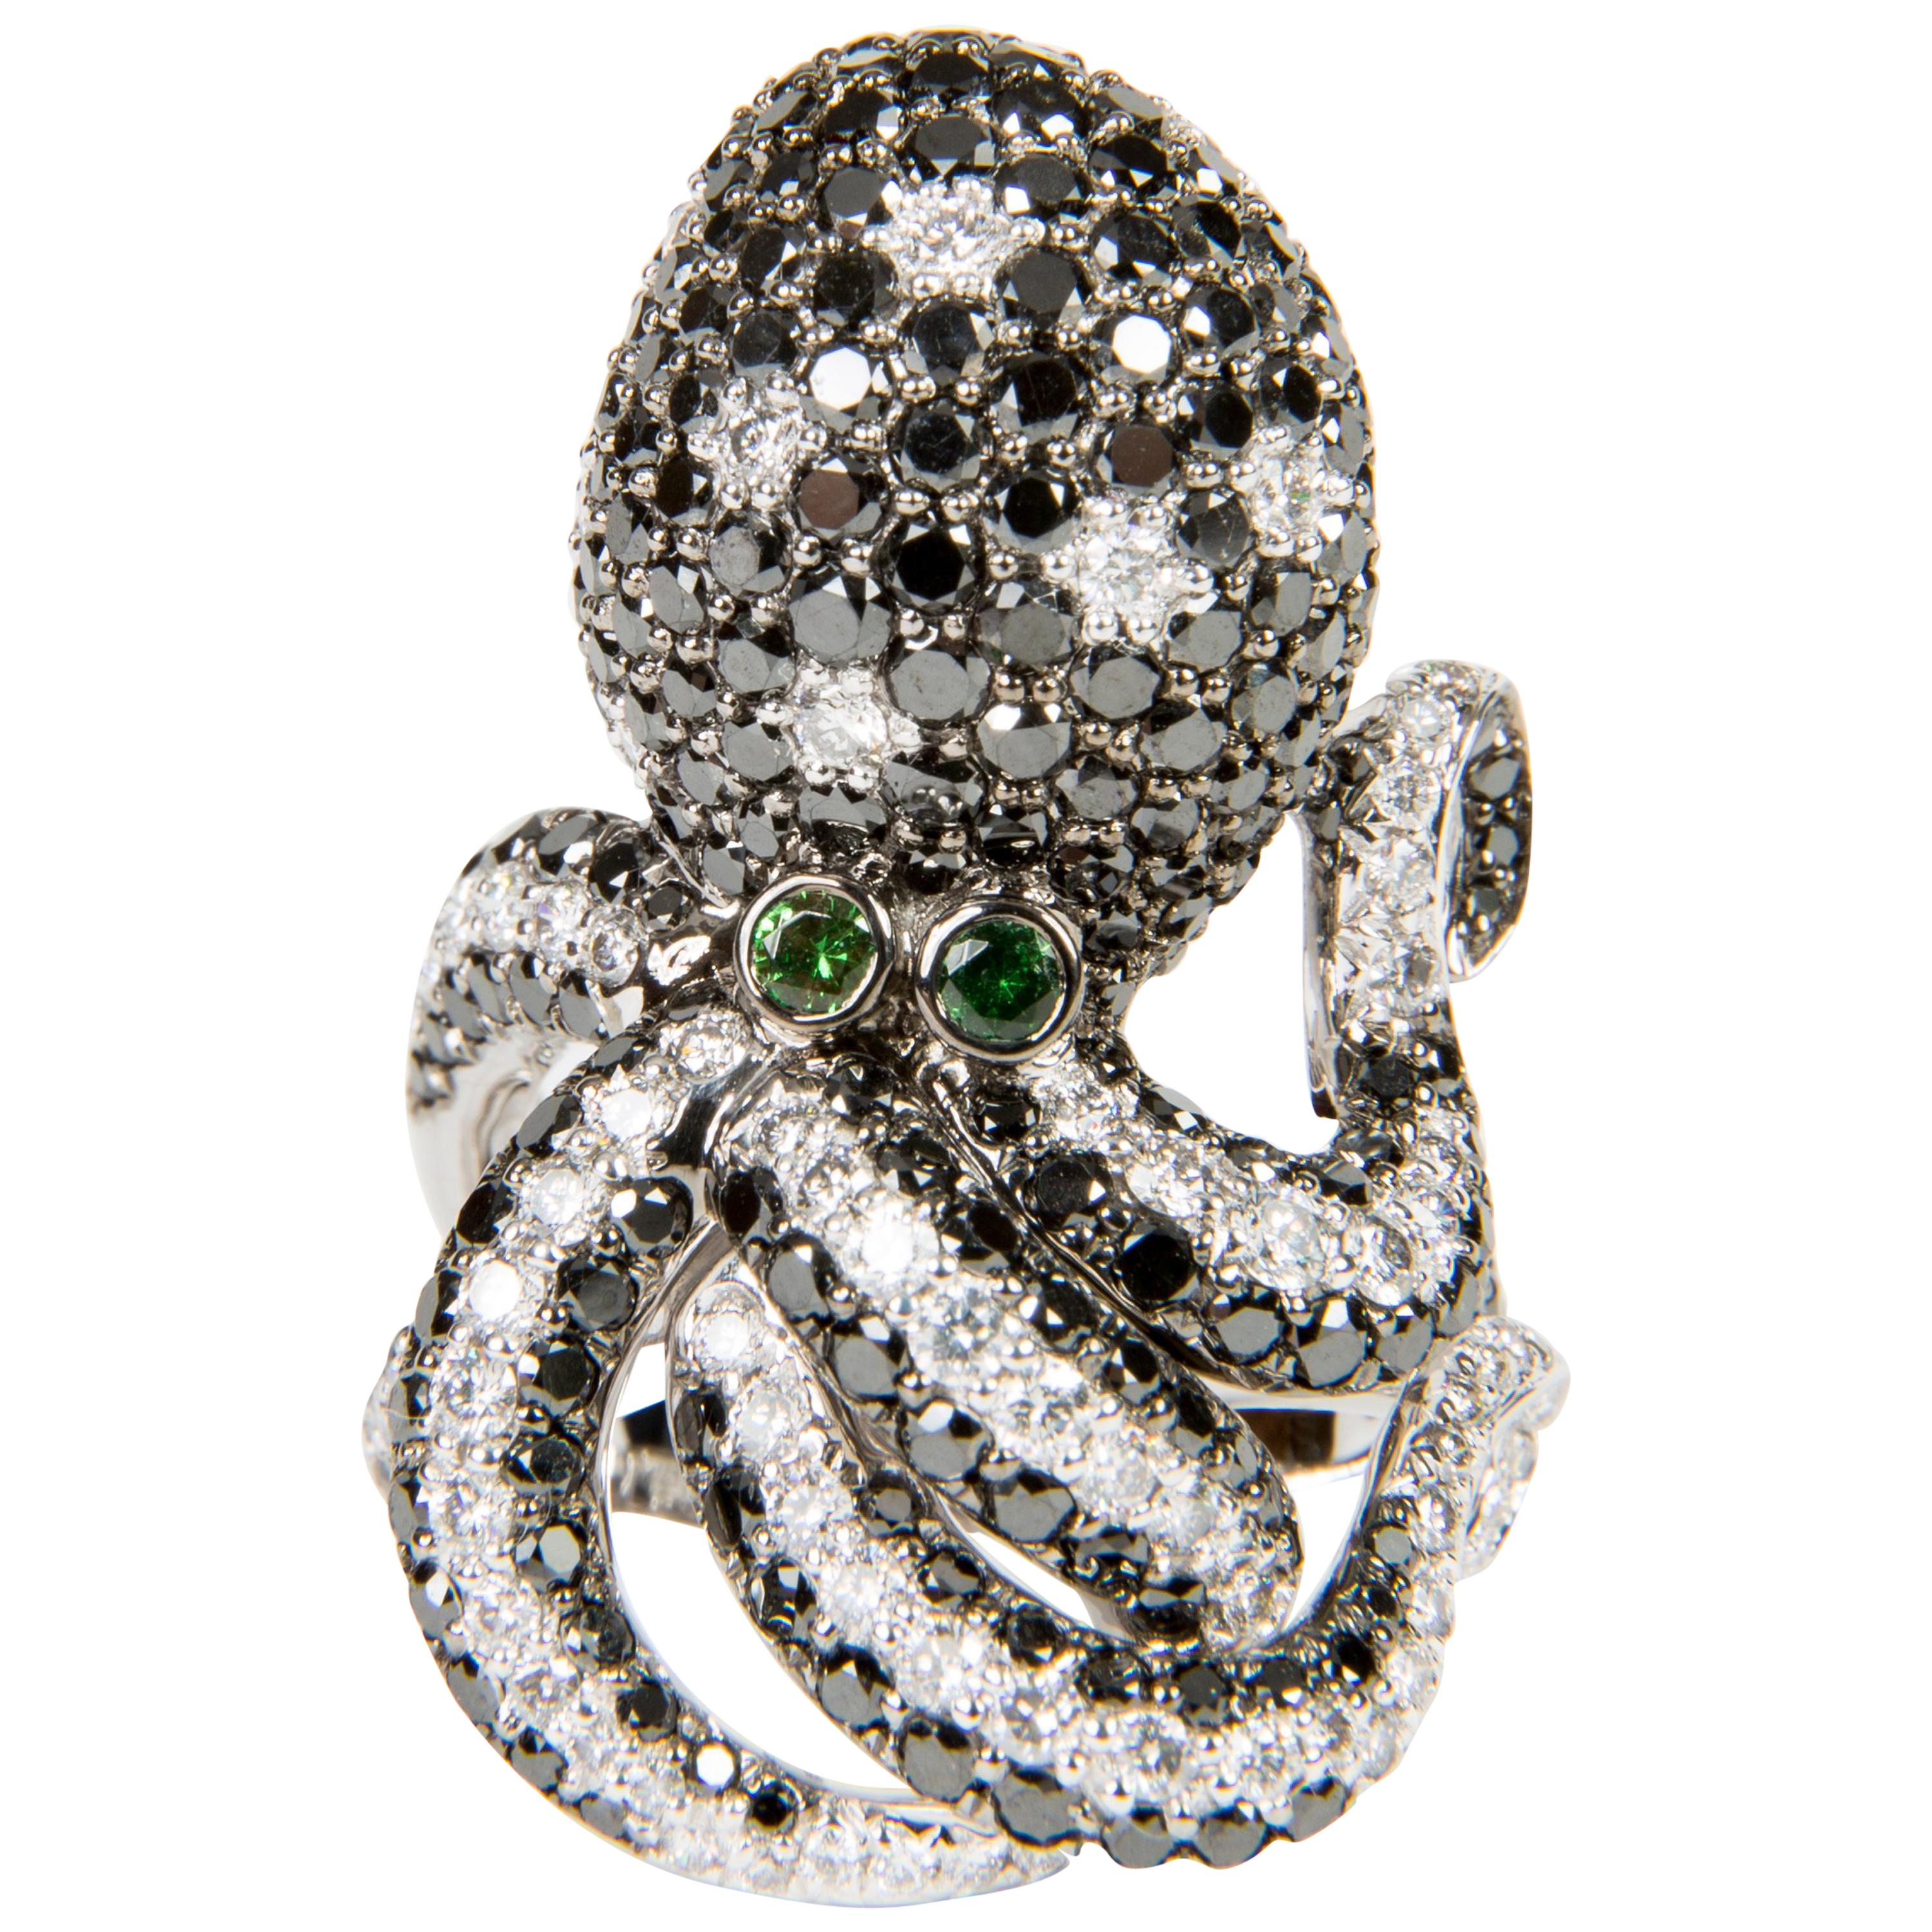 5.63 Carat Diamond and Tsavorite Octopus Shaped Cocktail Ring in 18 Karat Gold For Sale